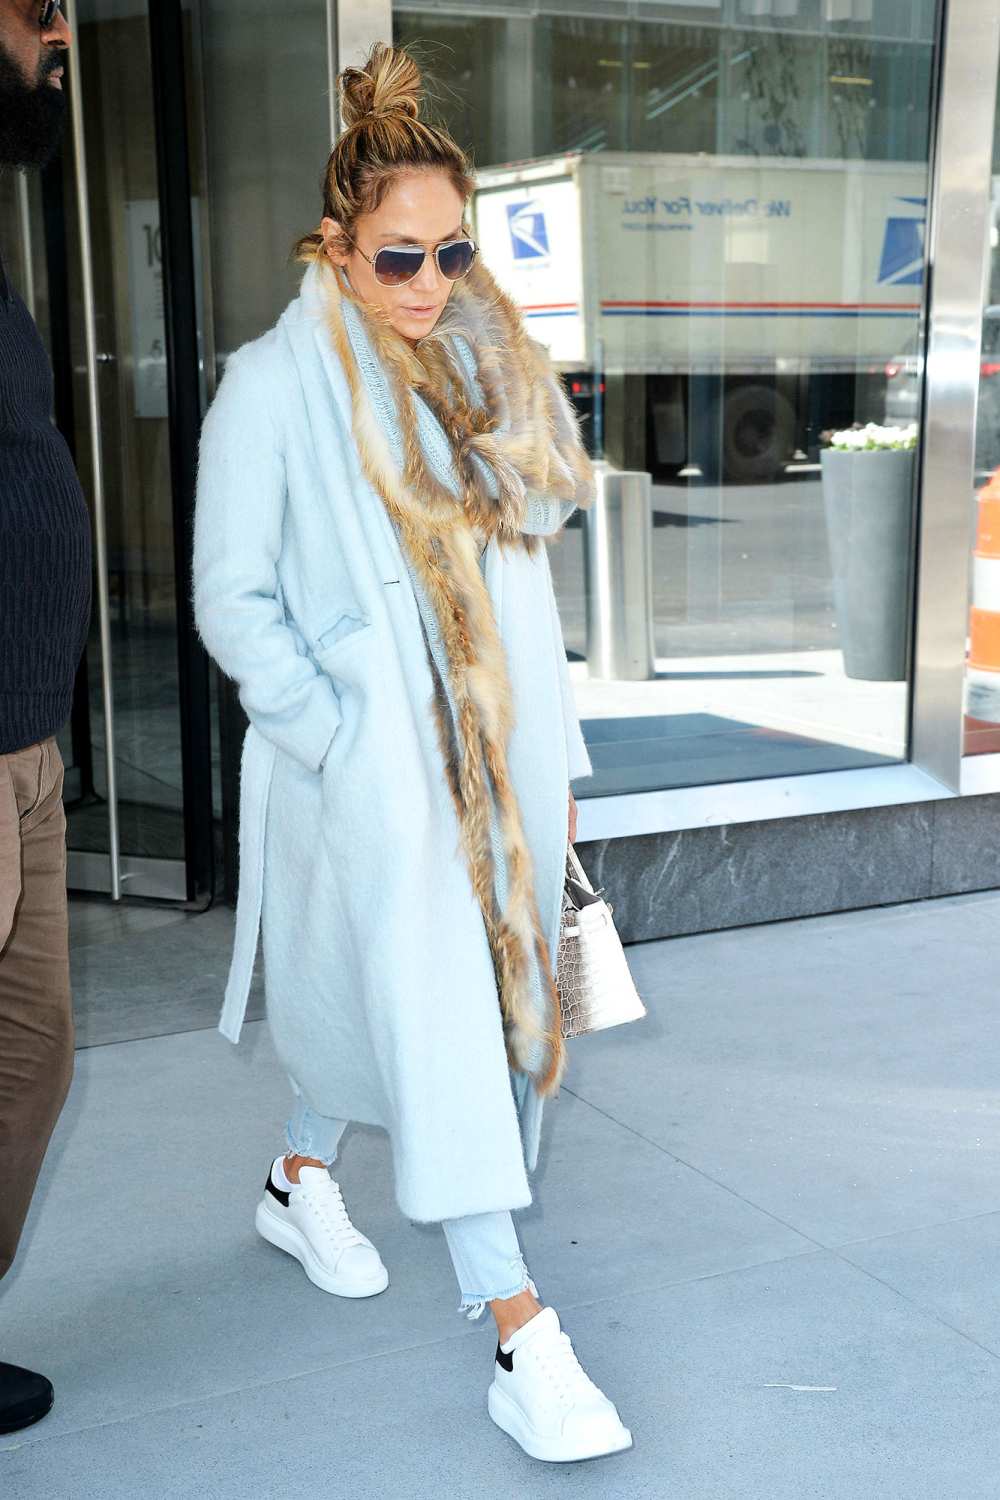 J. Lo Wore Over $100K In Clothes To Take Her Daughter Discount Shopping